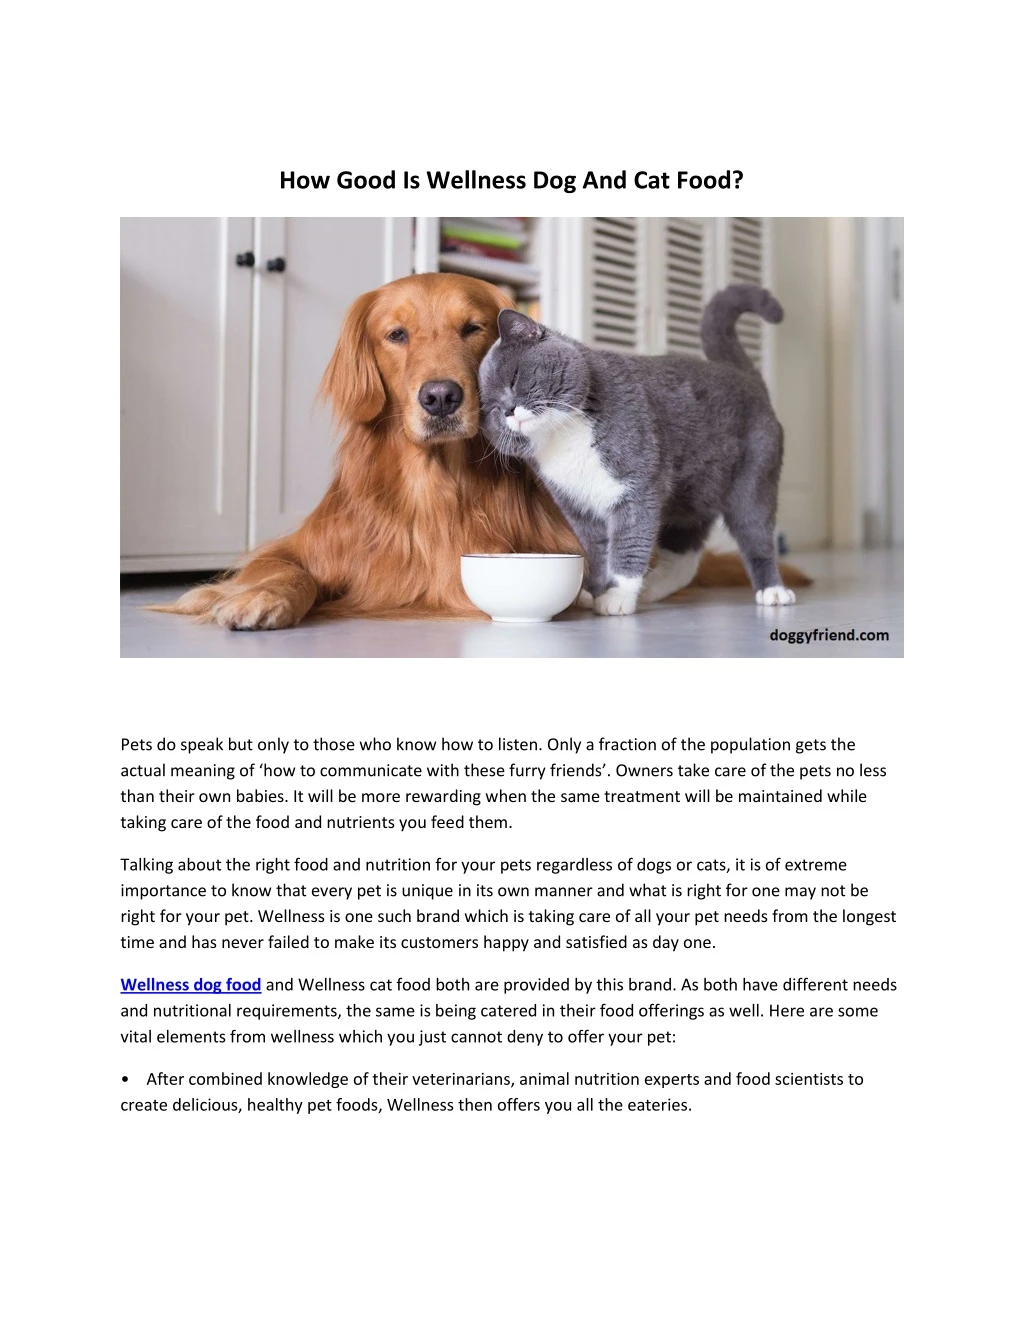 how good is wellness dog and cat food